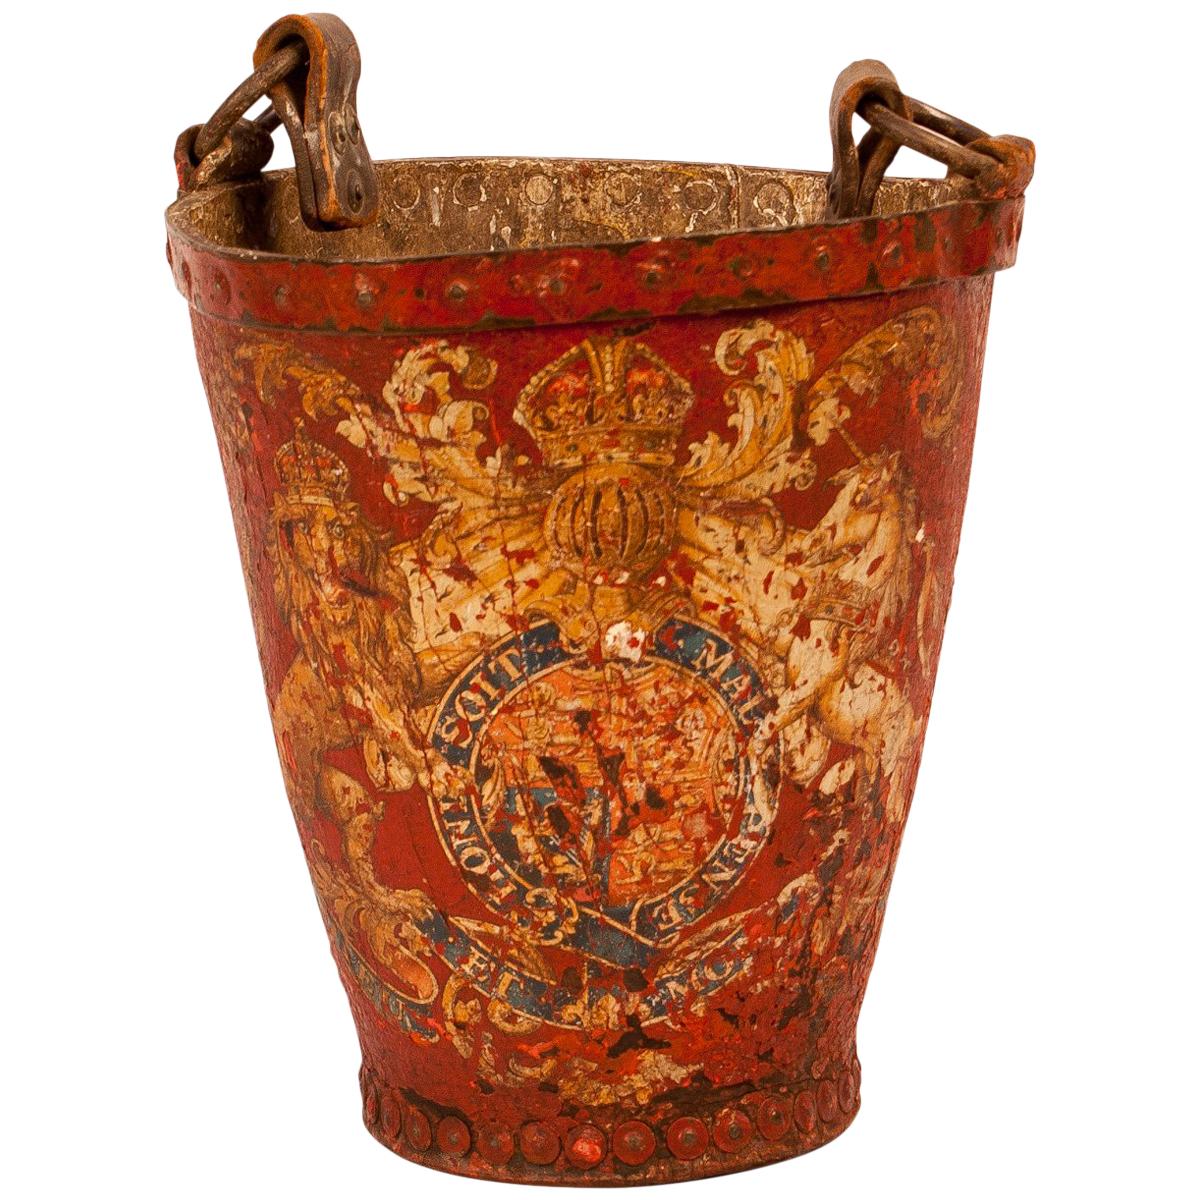 George III Period Red Leather Fire Bucket, England, circa 1780 Late 18th Century